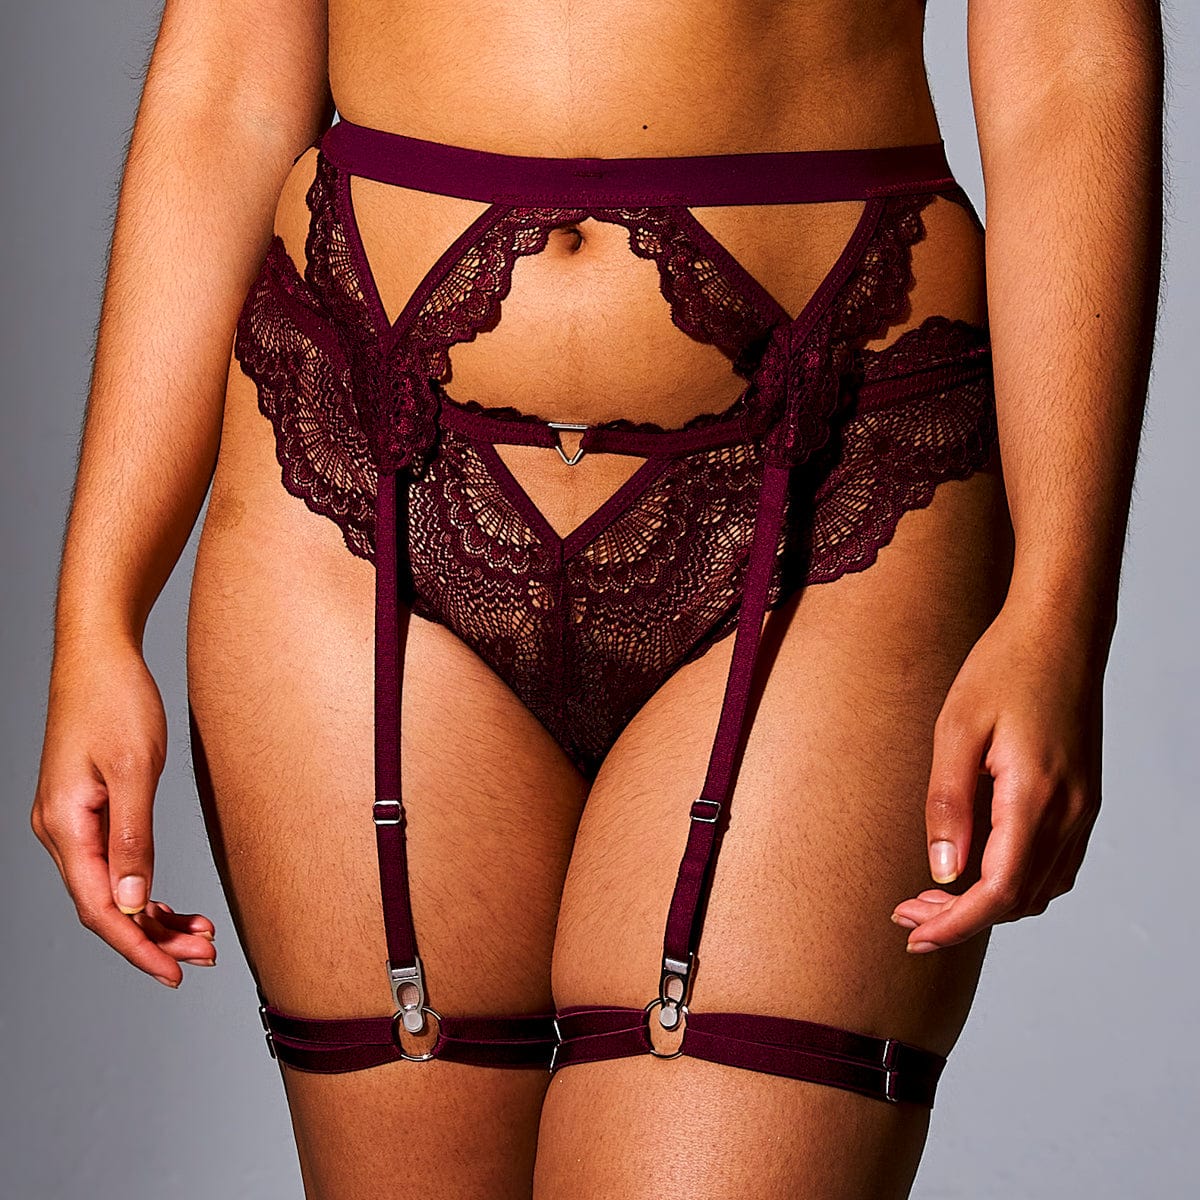 Strapped in Thigh Garters - Cherry